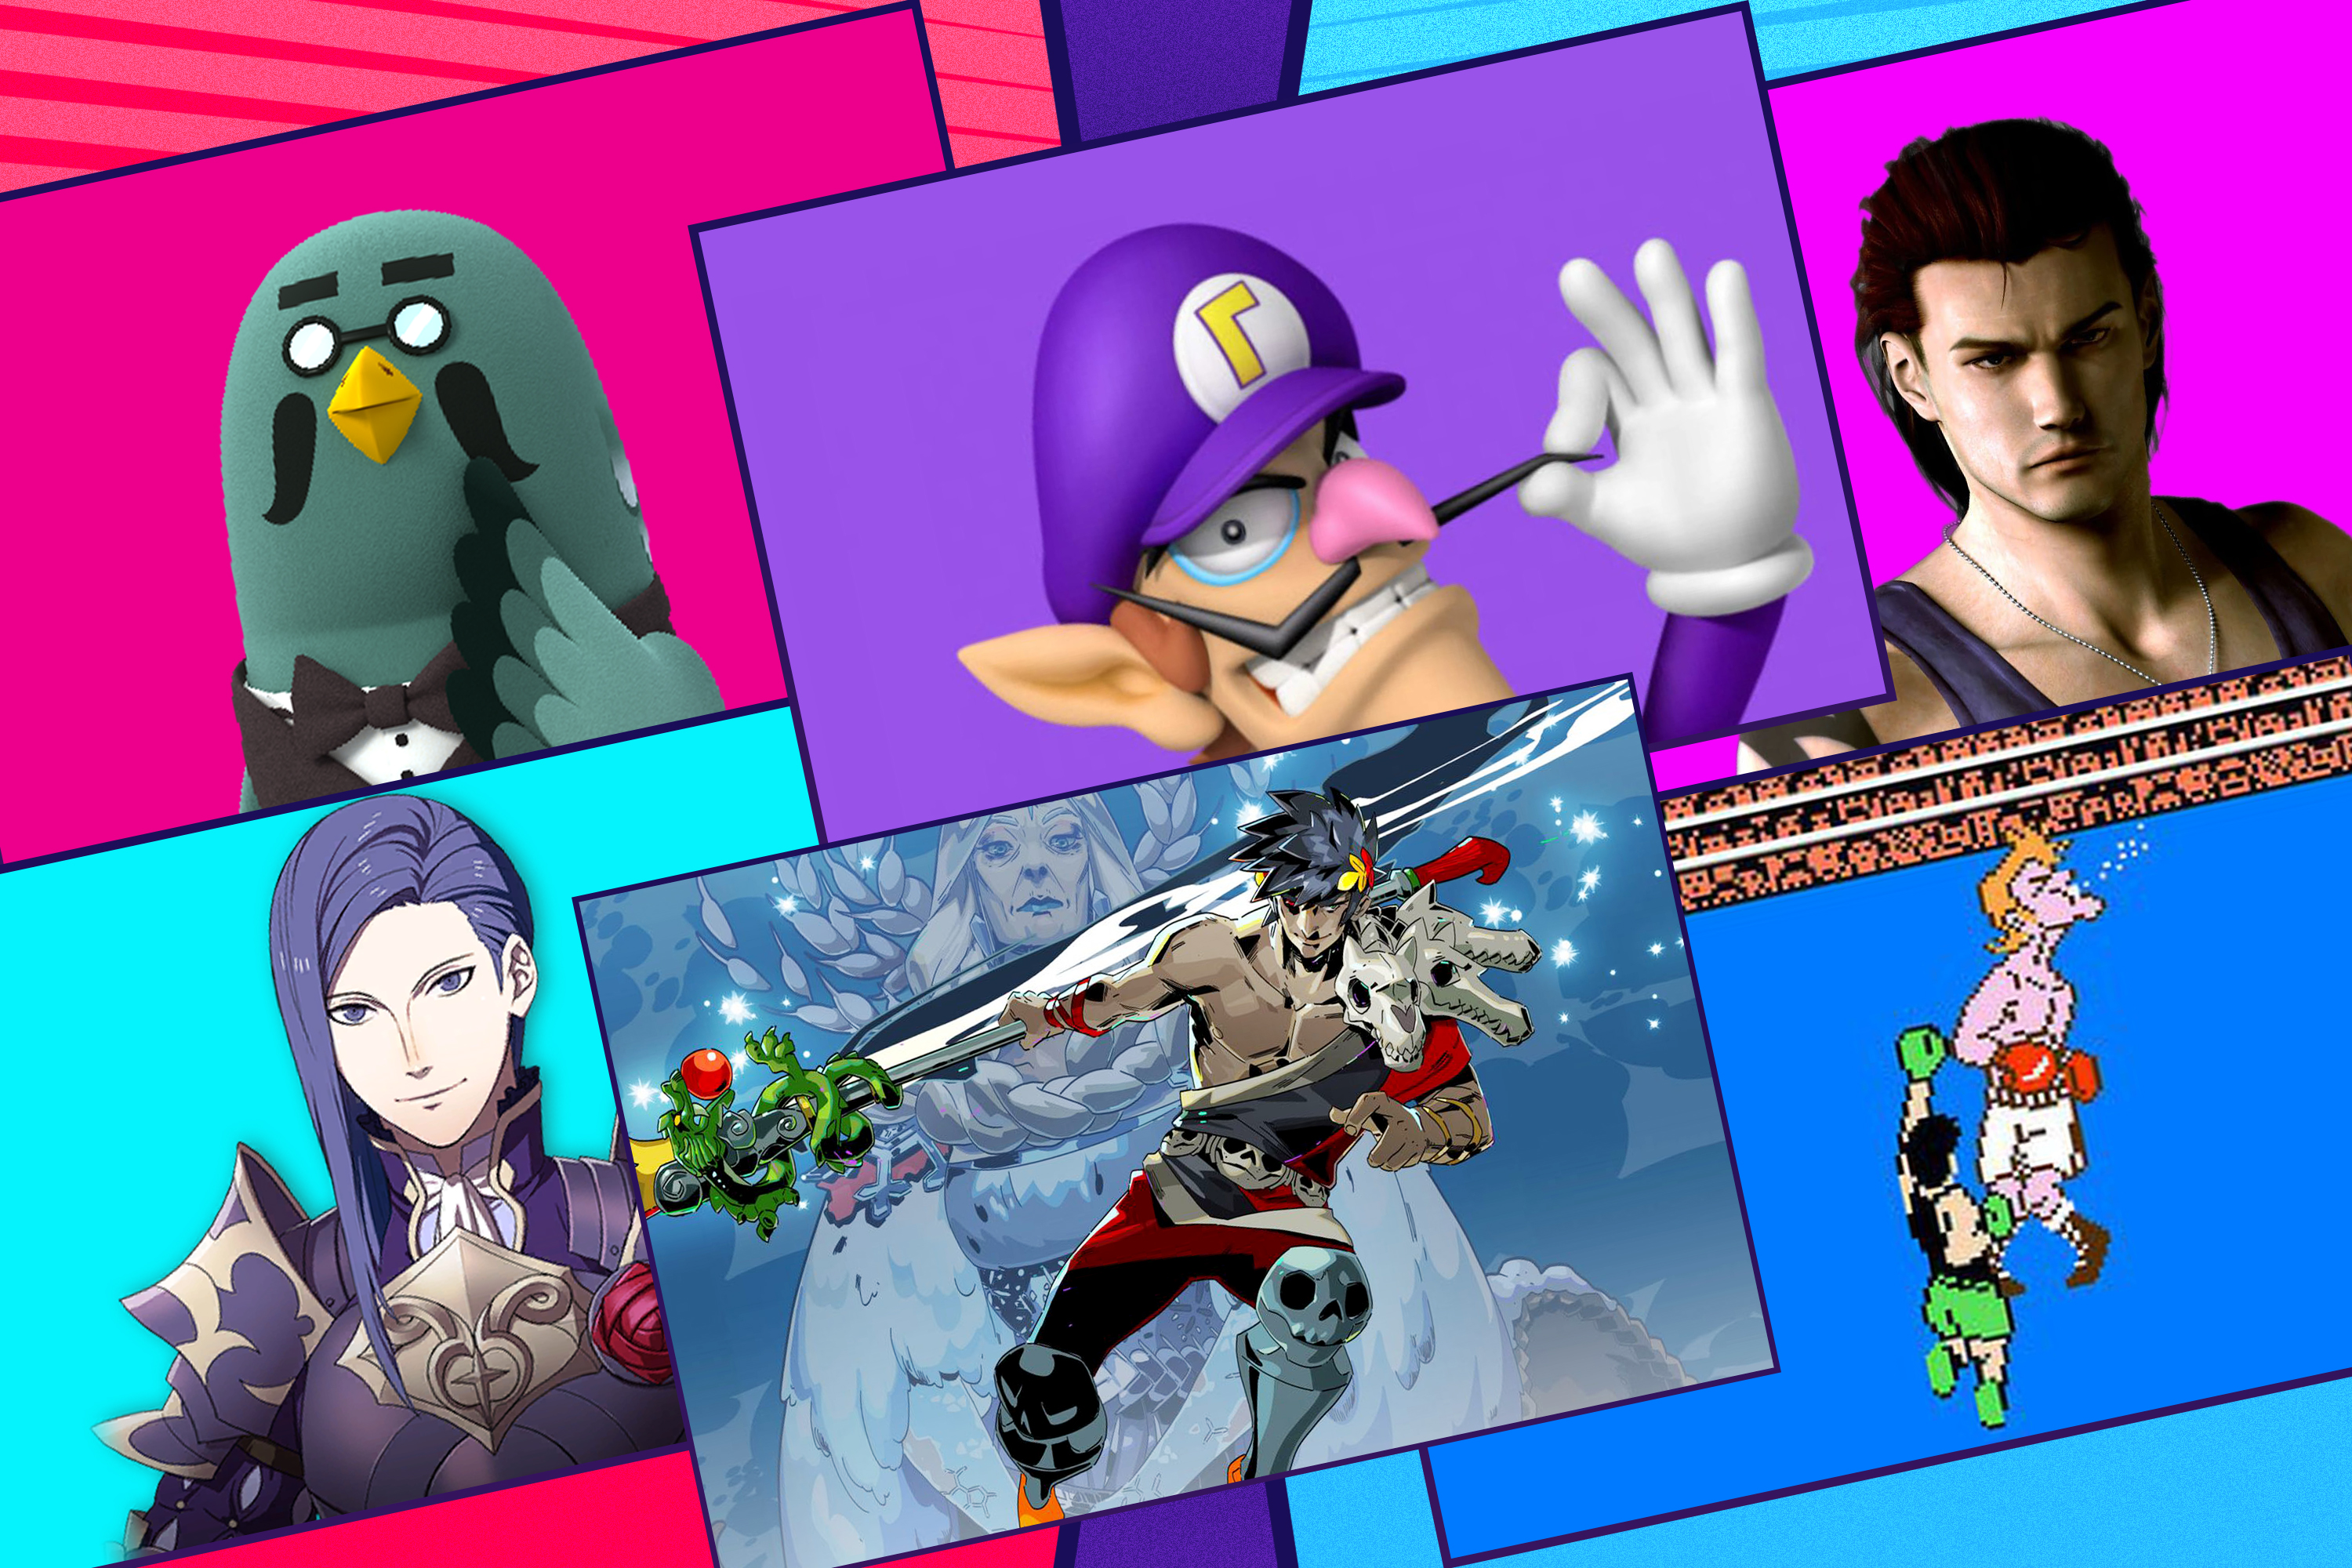 Graphic grid featuring six different video game characters who are all losers!